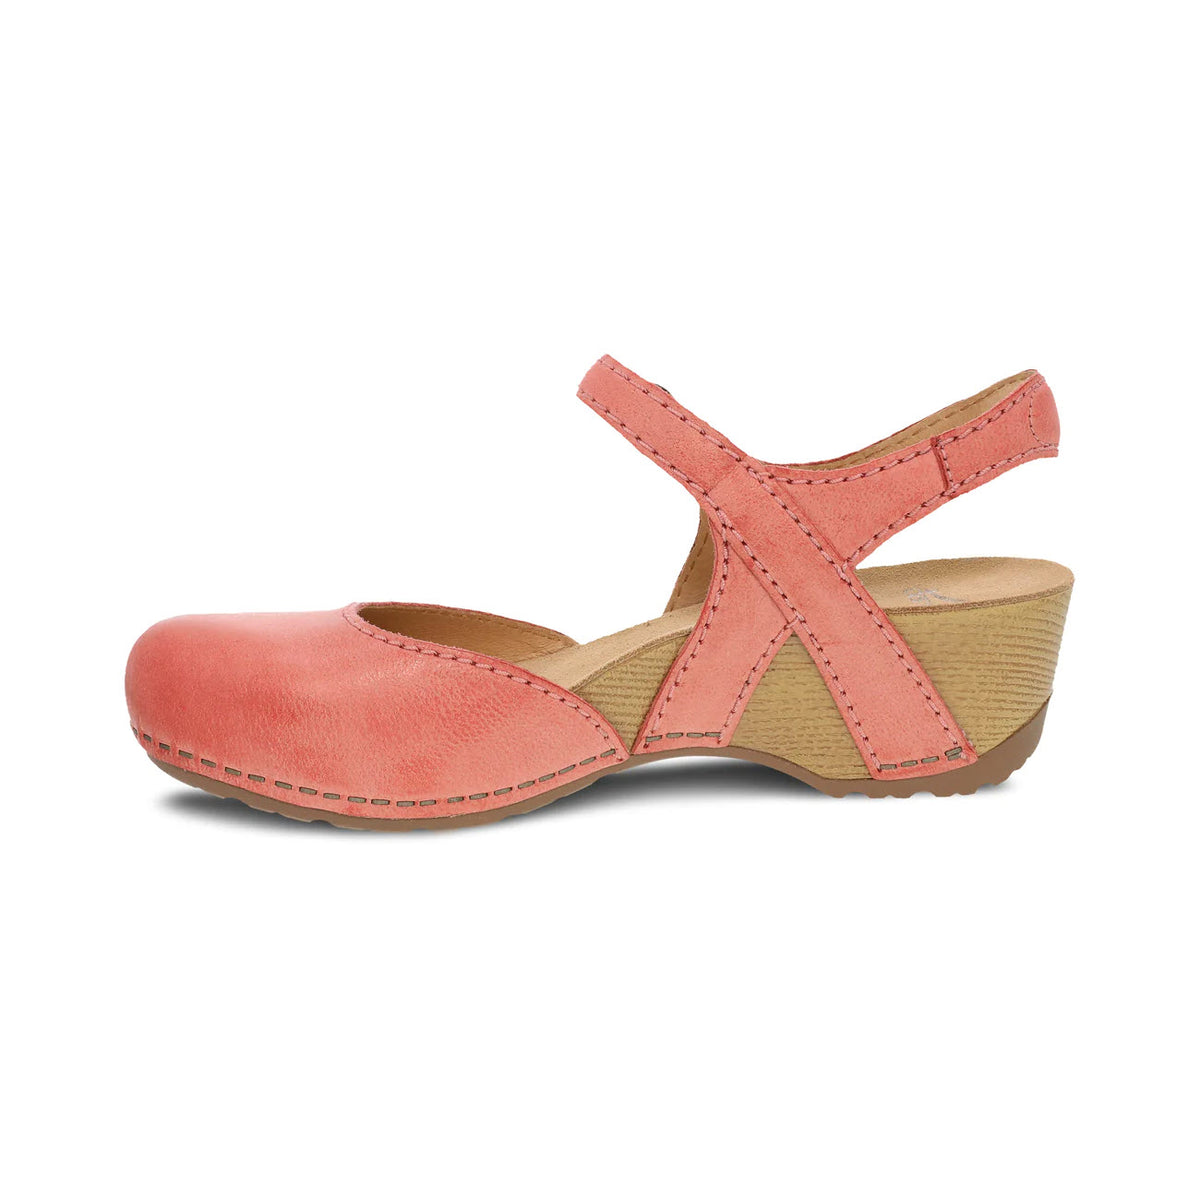 A single Dansko coral-colored leather mary jane shoe with a strap over the instep and a low wooden heel, wear-anywhere style, isolated on a white background.